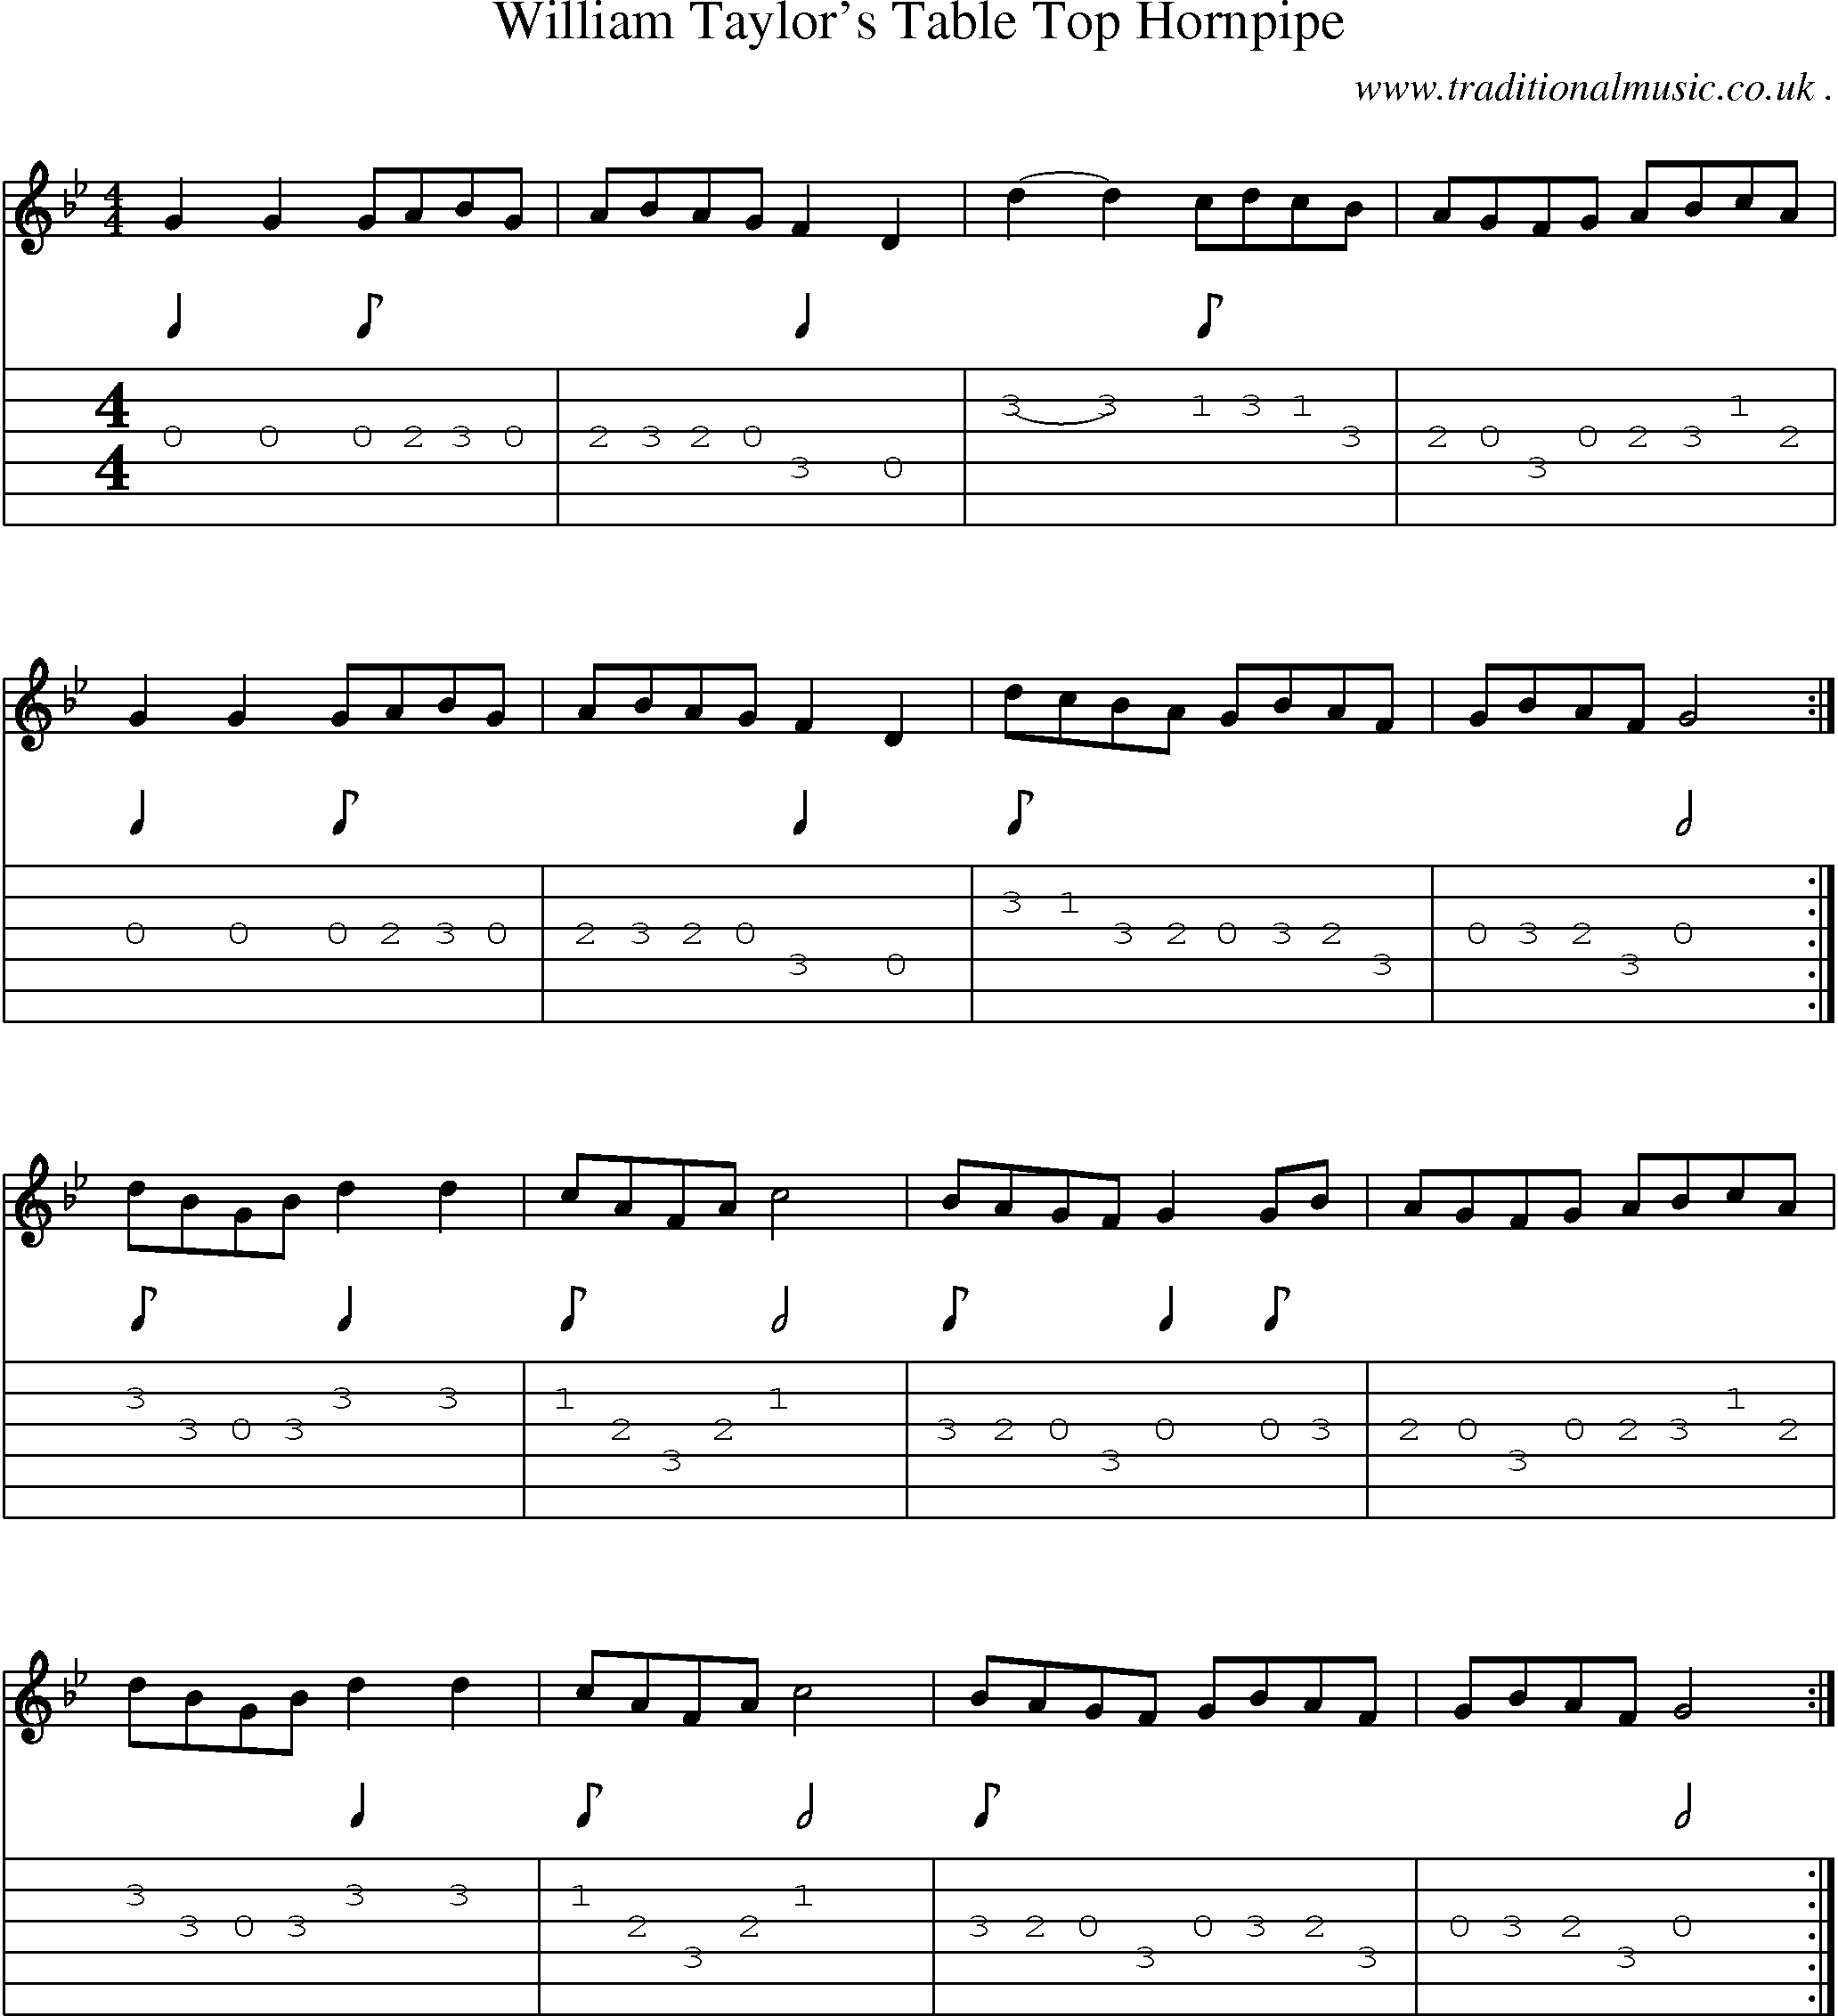 Sheet-Music and Guitar Tabs for William Taylors Table Top Hornpipe